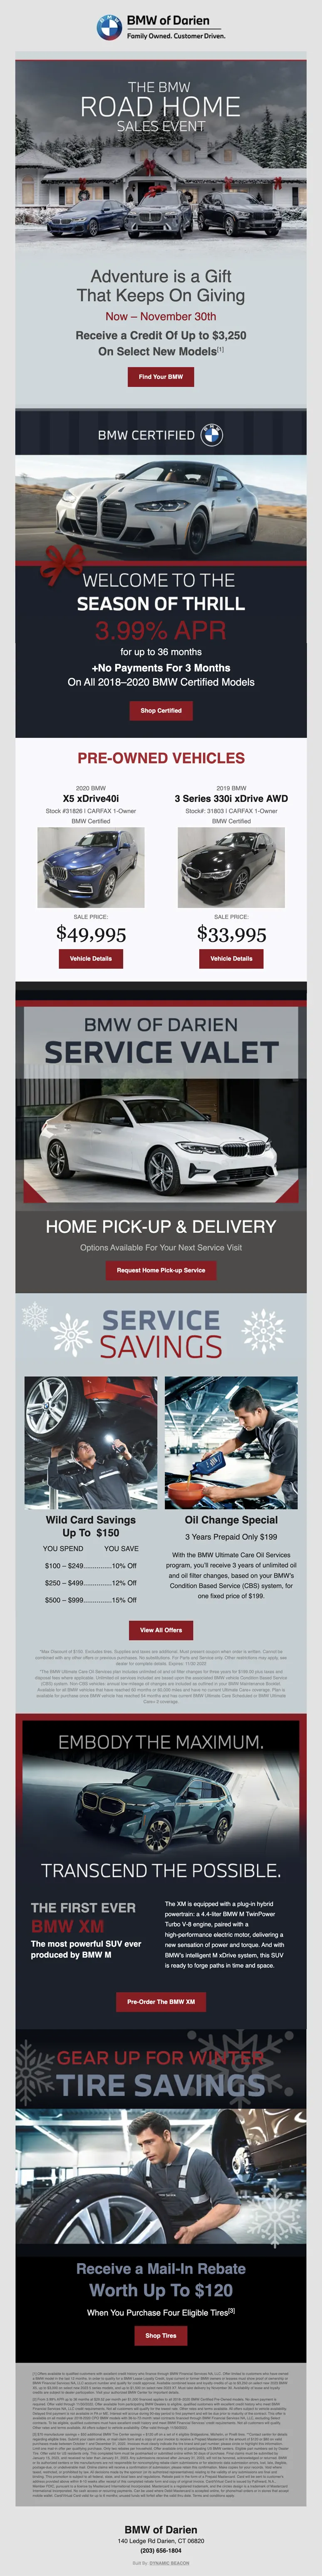 BMW Incentive Email Marketing